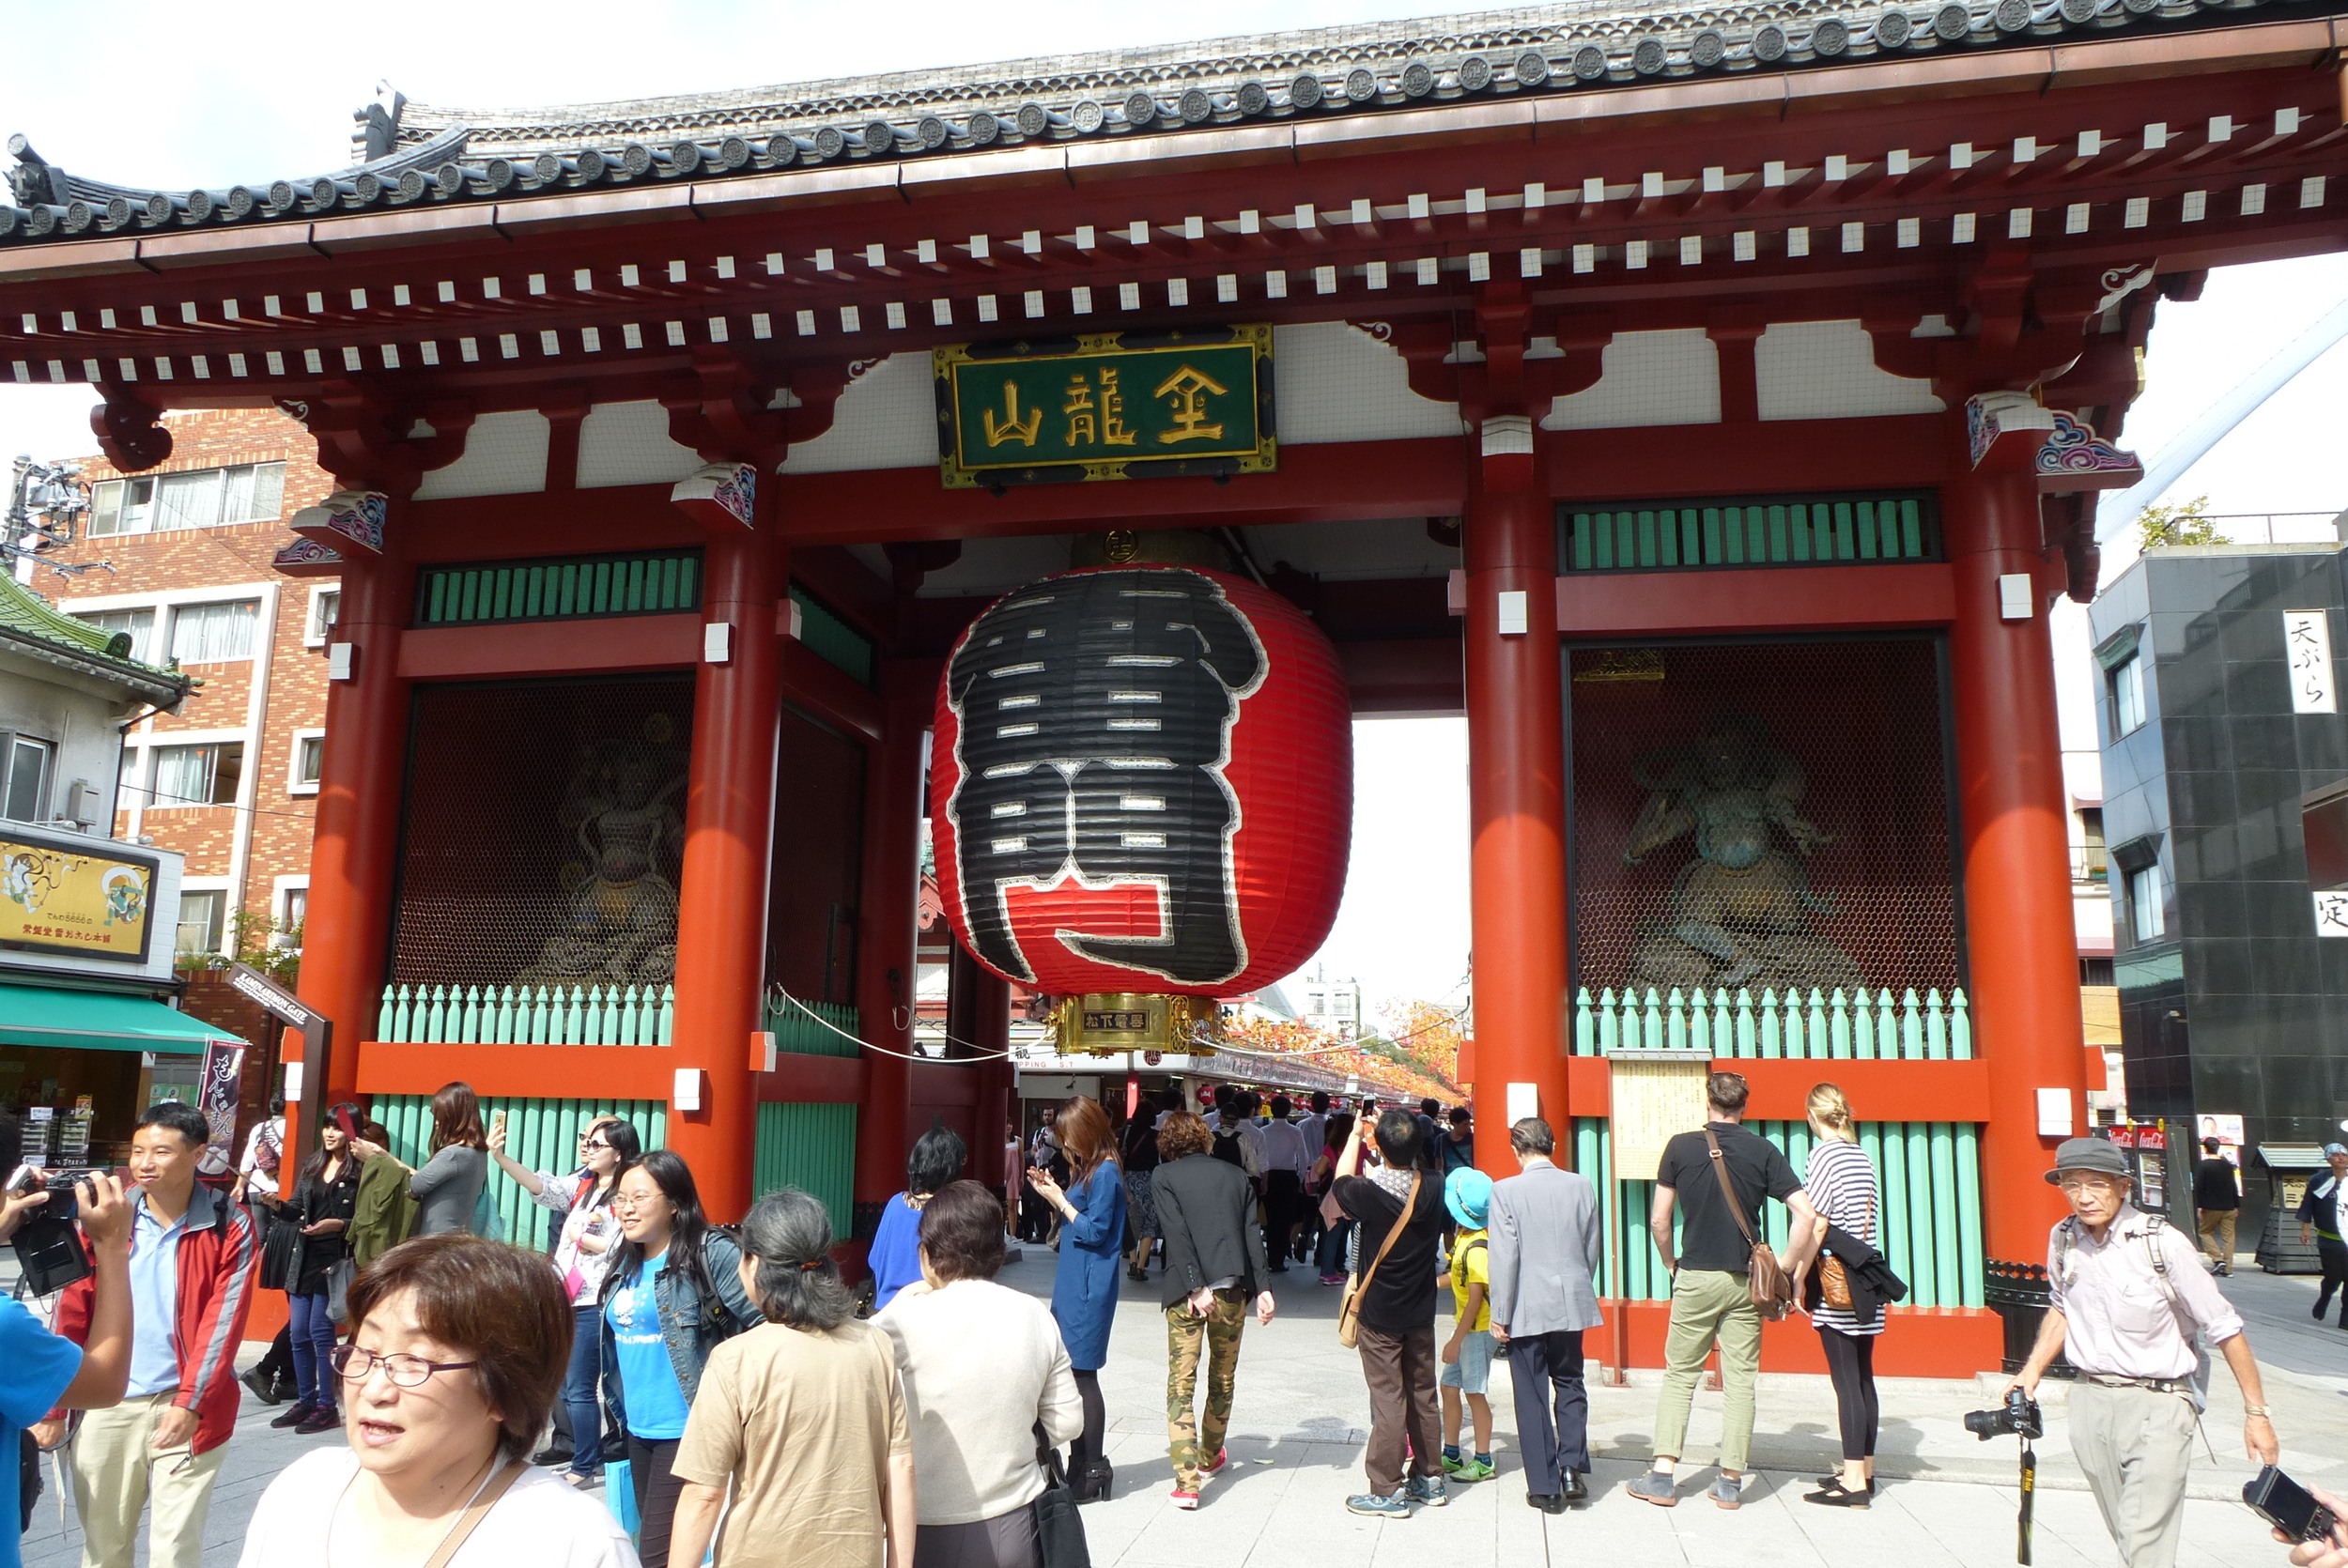 Kaminarimon is the first of two large entrance gates leading to Sensoji Temple.